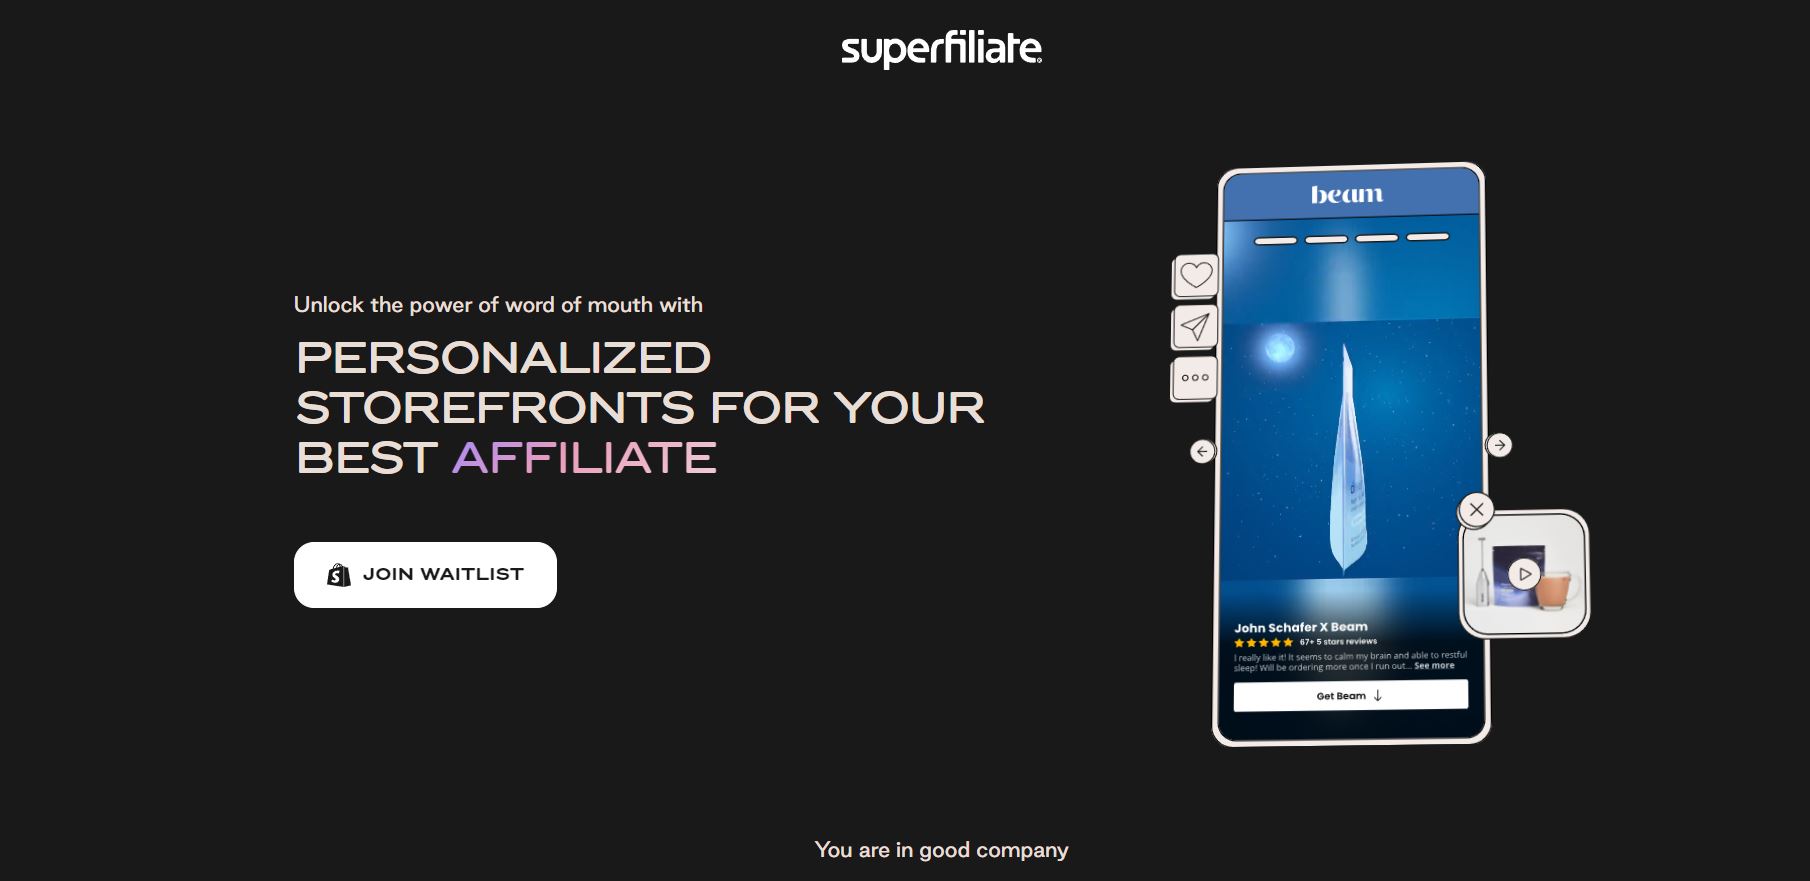 Superfiliate is the ultimate solution for businesses, and with $3M in seed funding